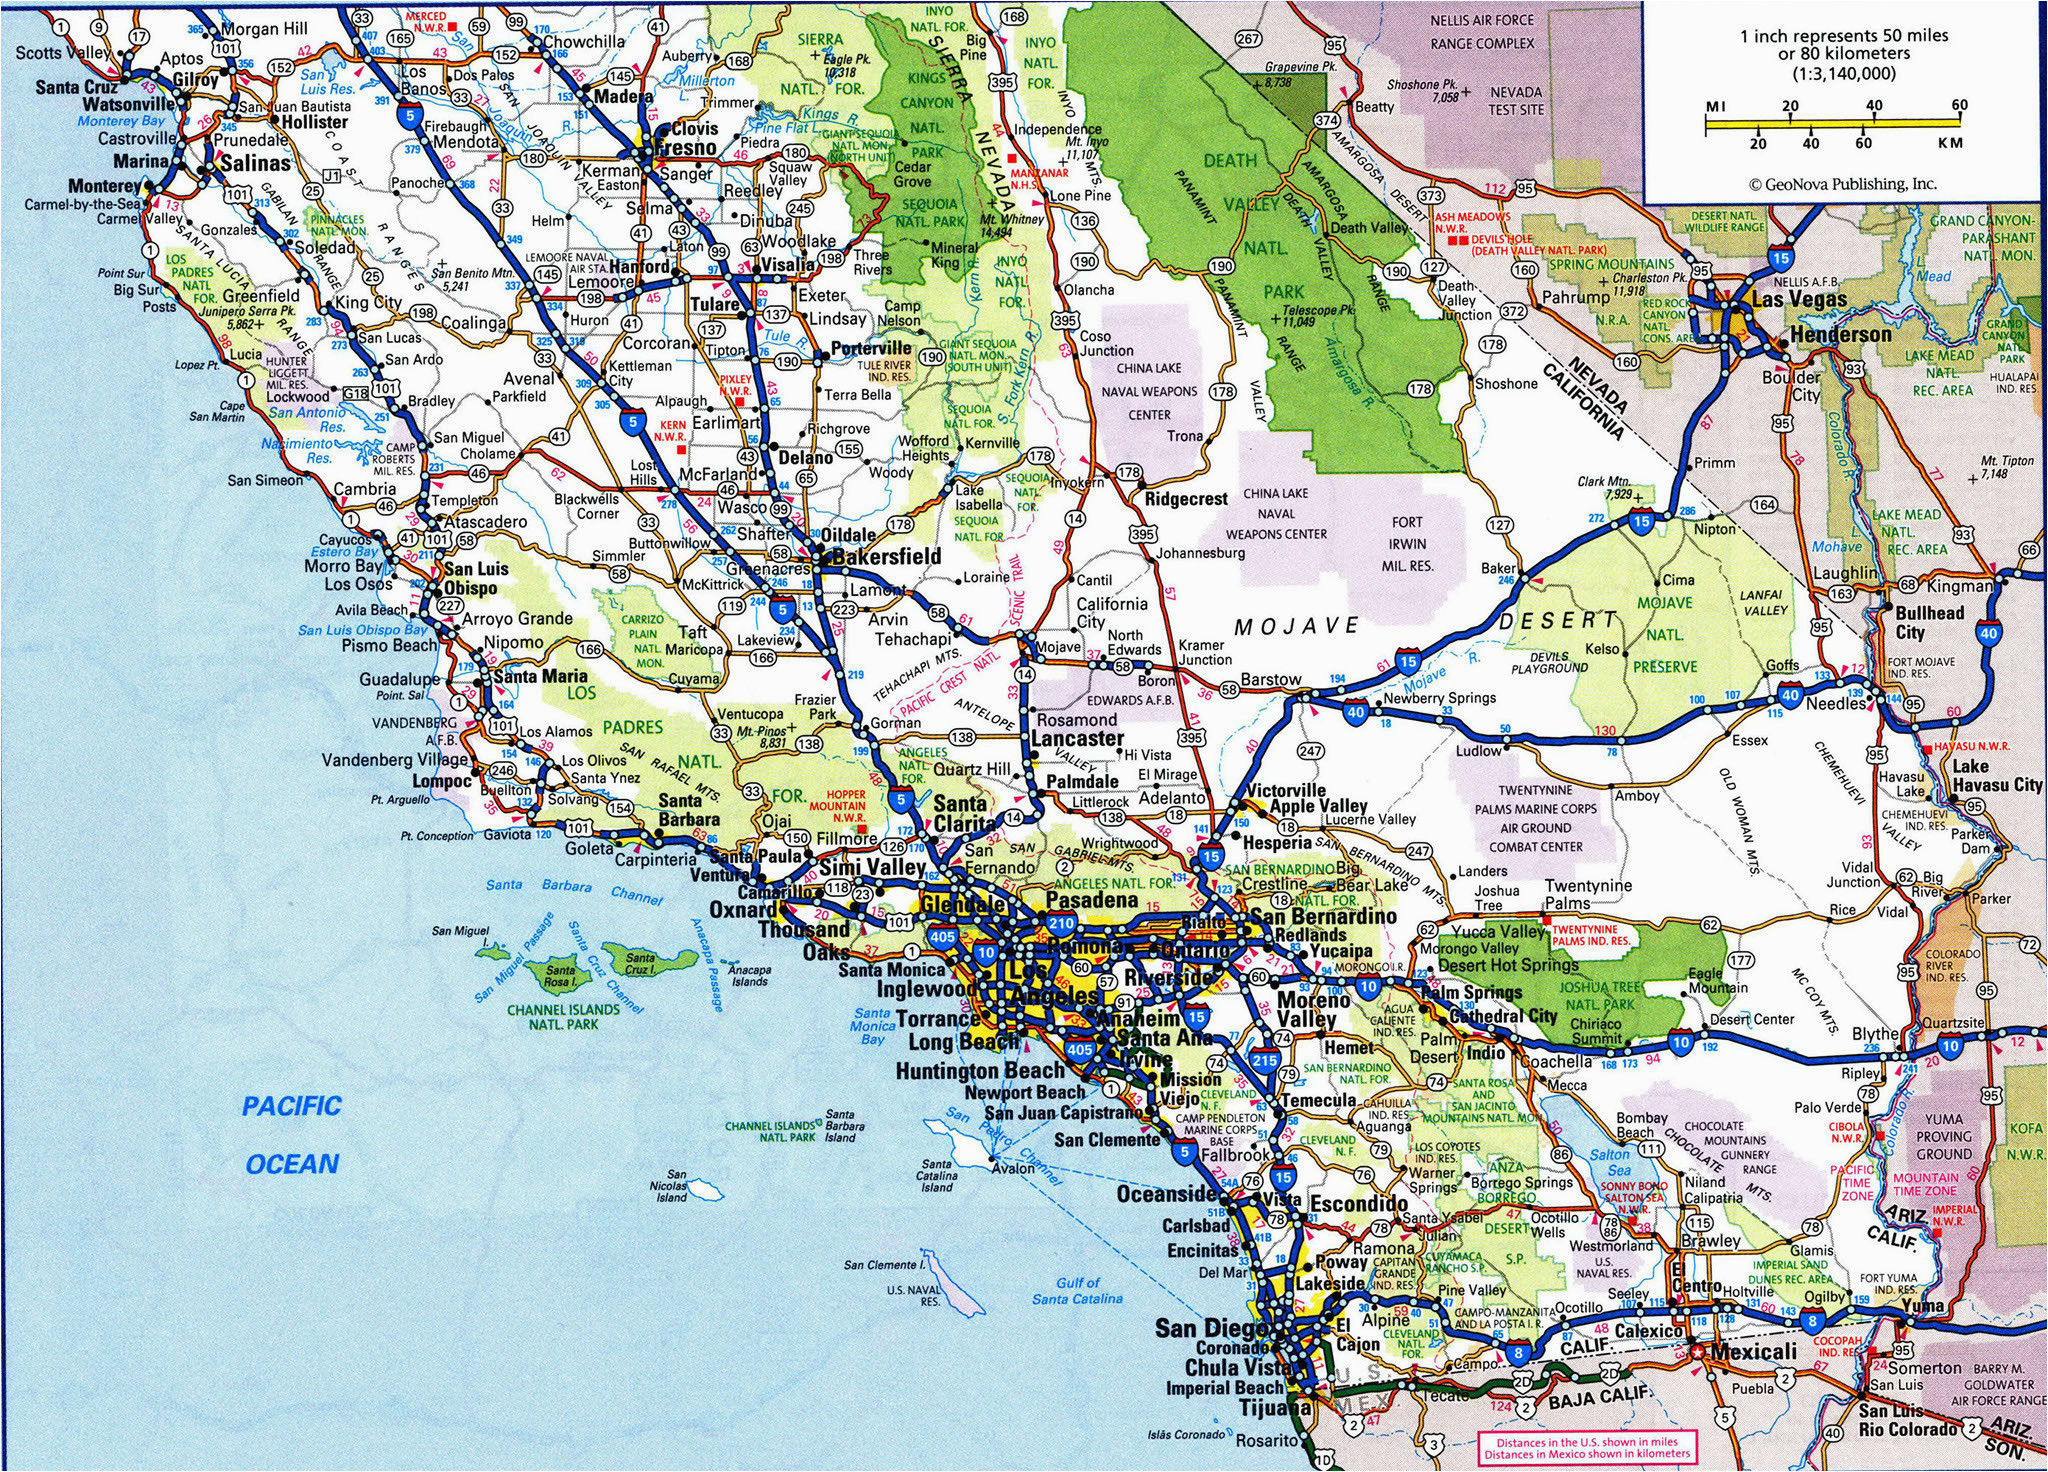 Diners Drive-ins and Dives California Map southern California Highway Map Ettcarworld Best Diners Drive Ins